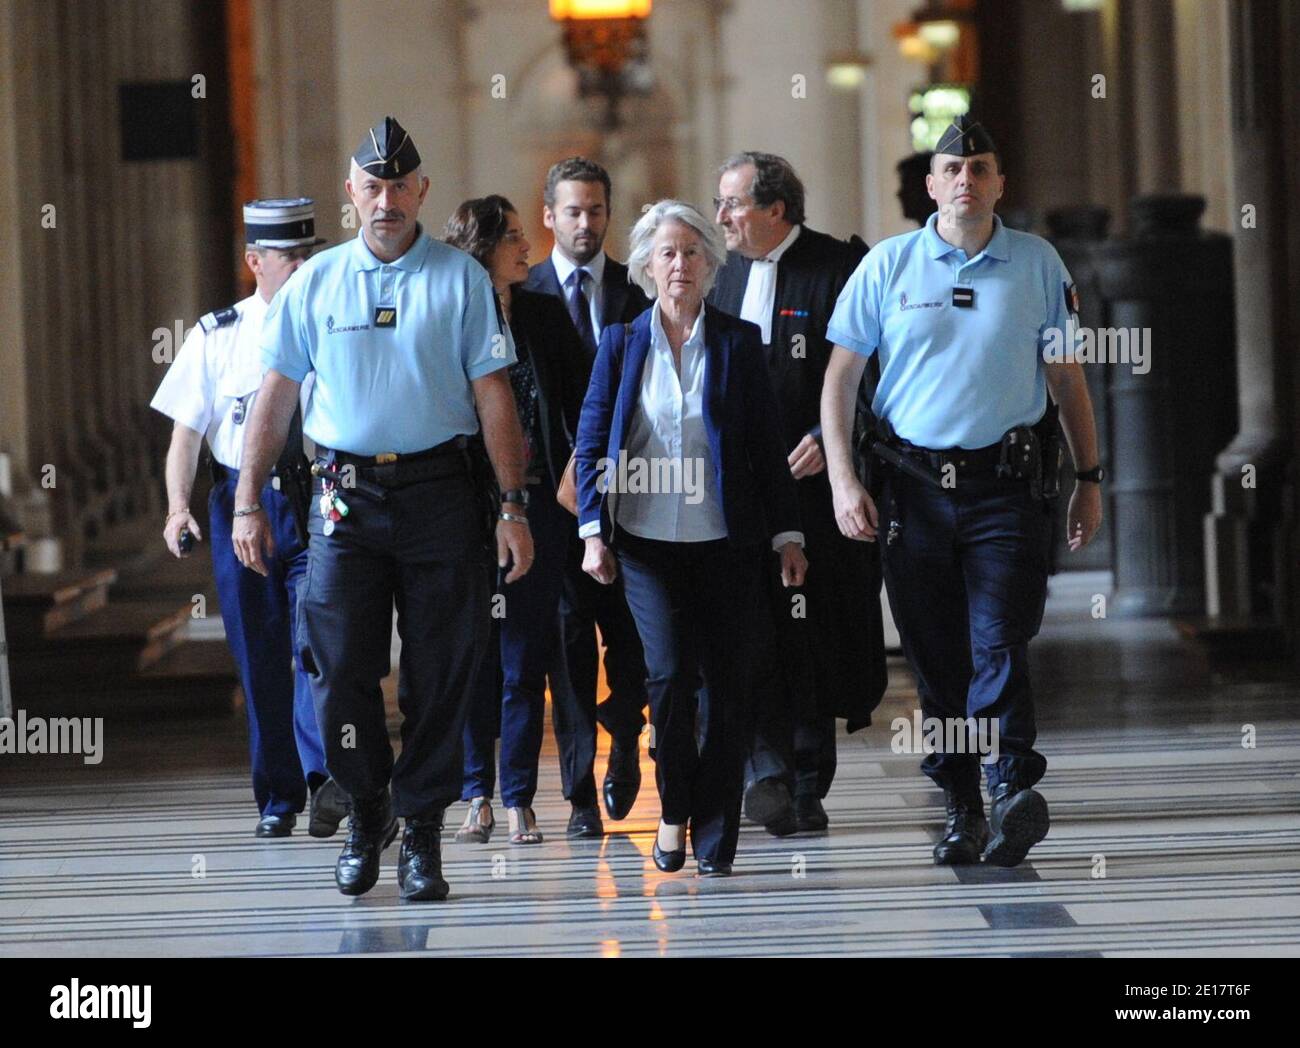 Dominique Erignac, widow of former French prefect Claude Erignac with her son, her daughter and her lawyers arriving the Paris court hall in Paris, France, on June 20, 2011, during Yvan Colonna's appeal trial for the murder in 1998 of Claude Erignac, France's top state official on the Mediterranean island of Corsica. Photo by Mousse/ABACAPRESS.COM Stock Photo